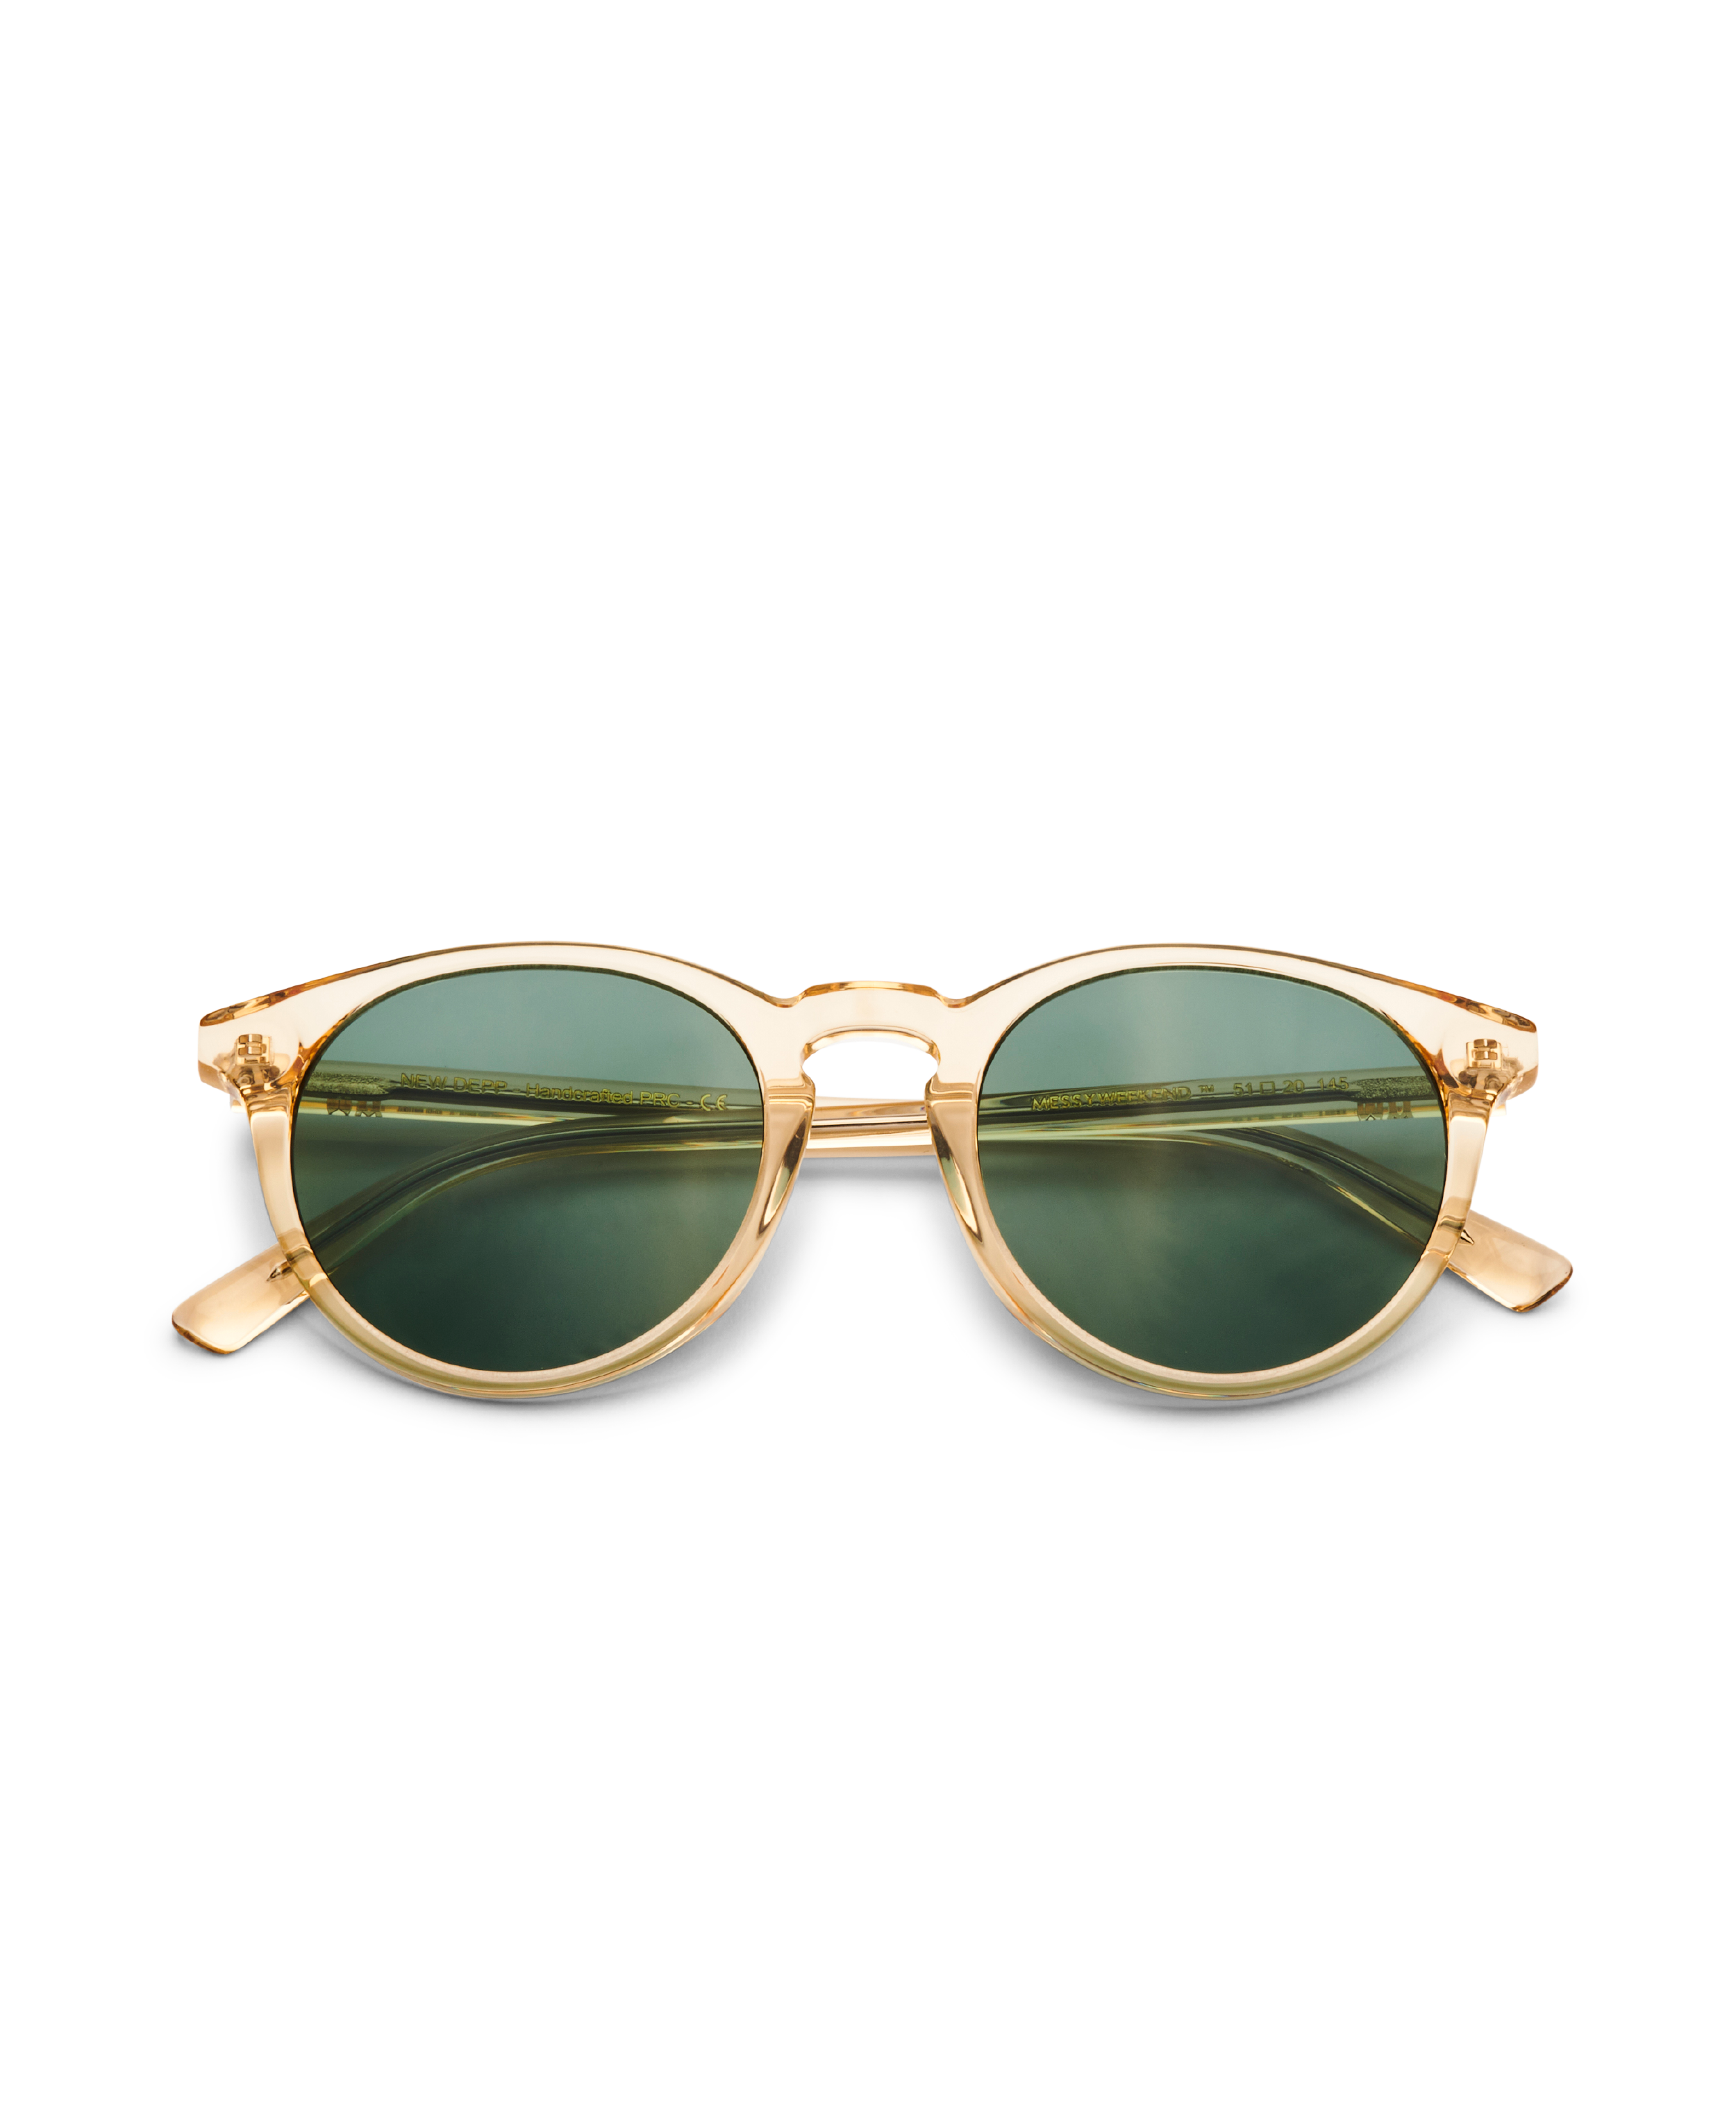 Sunglasses New Depp in Champagne Clear w. Green lenses